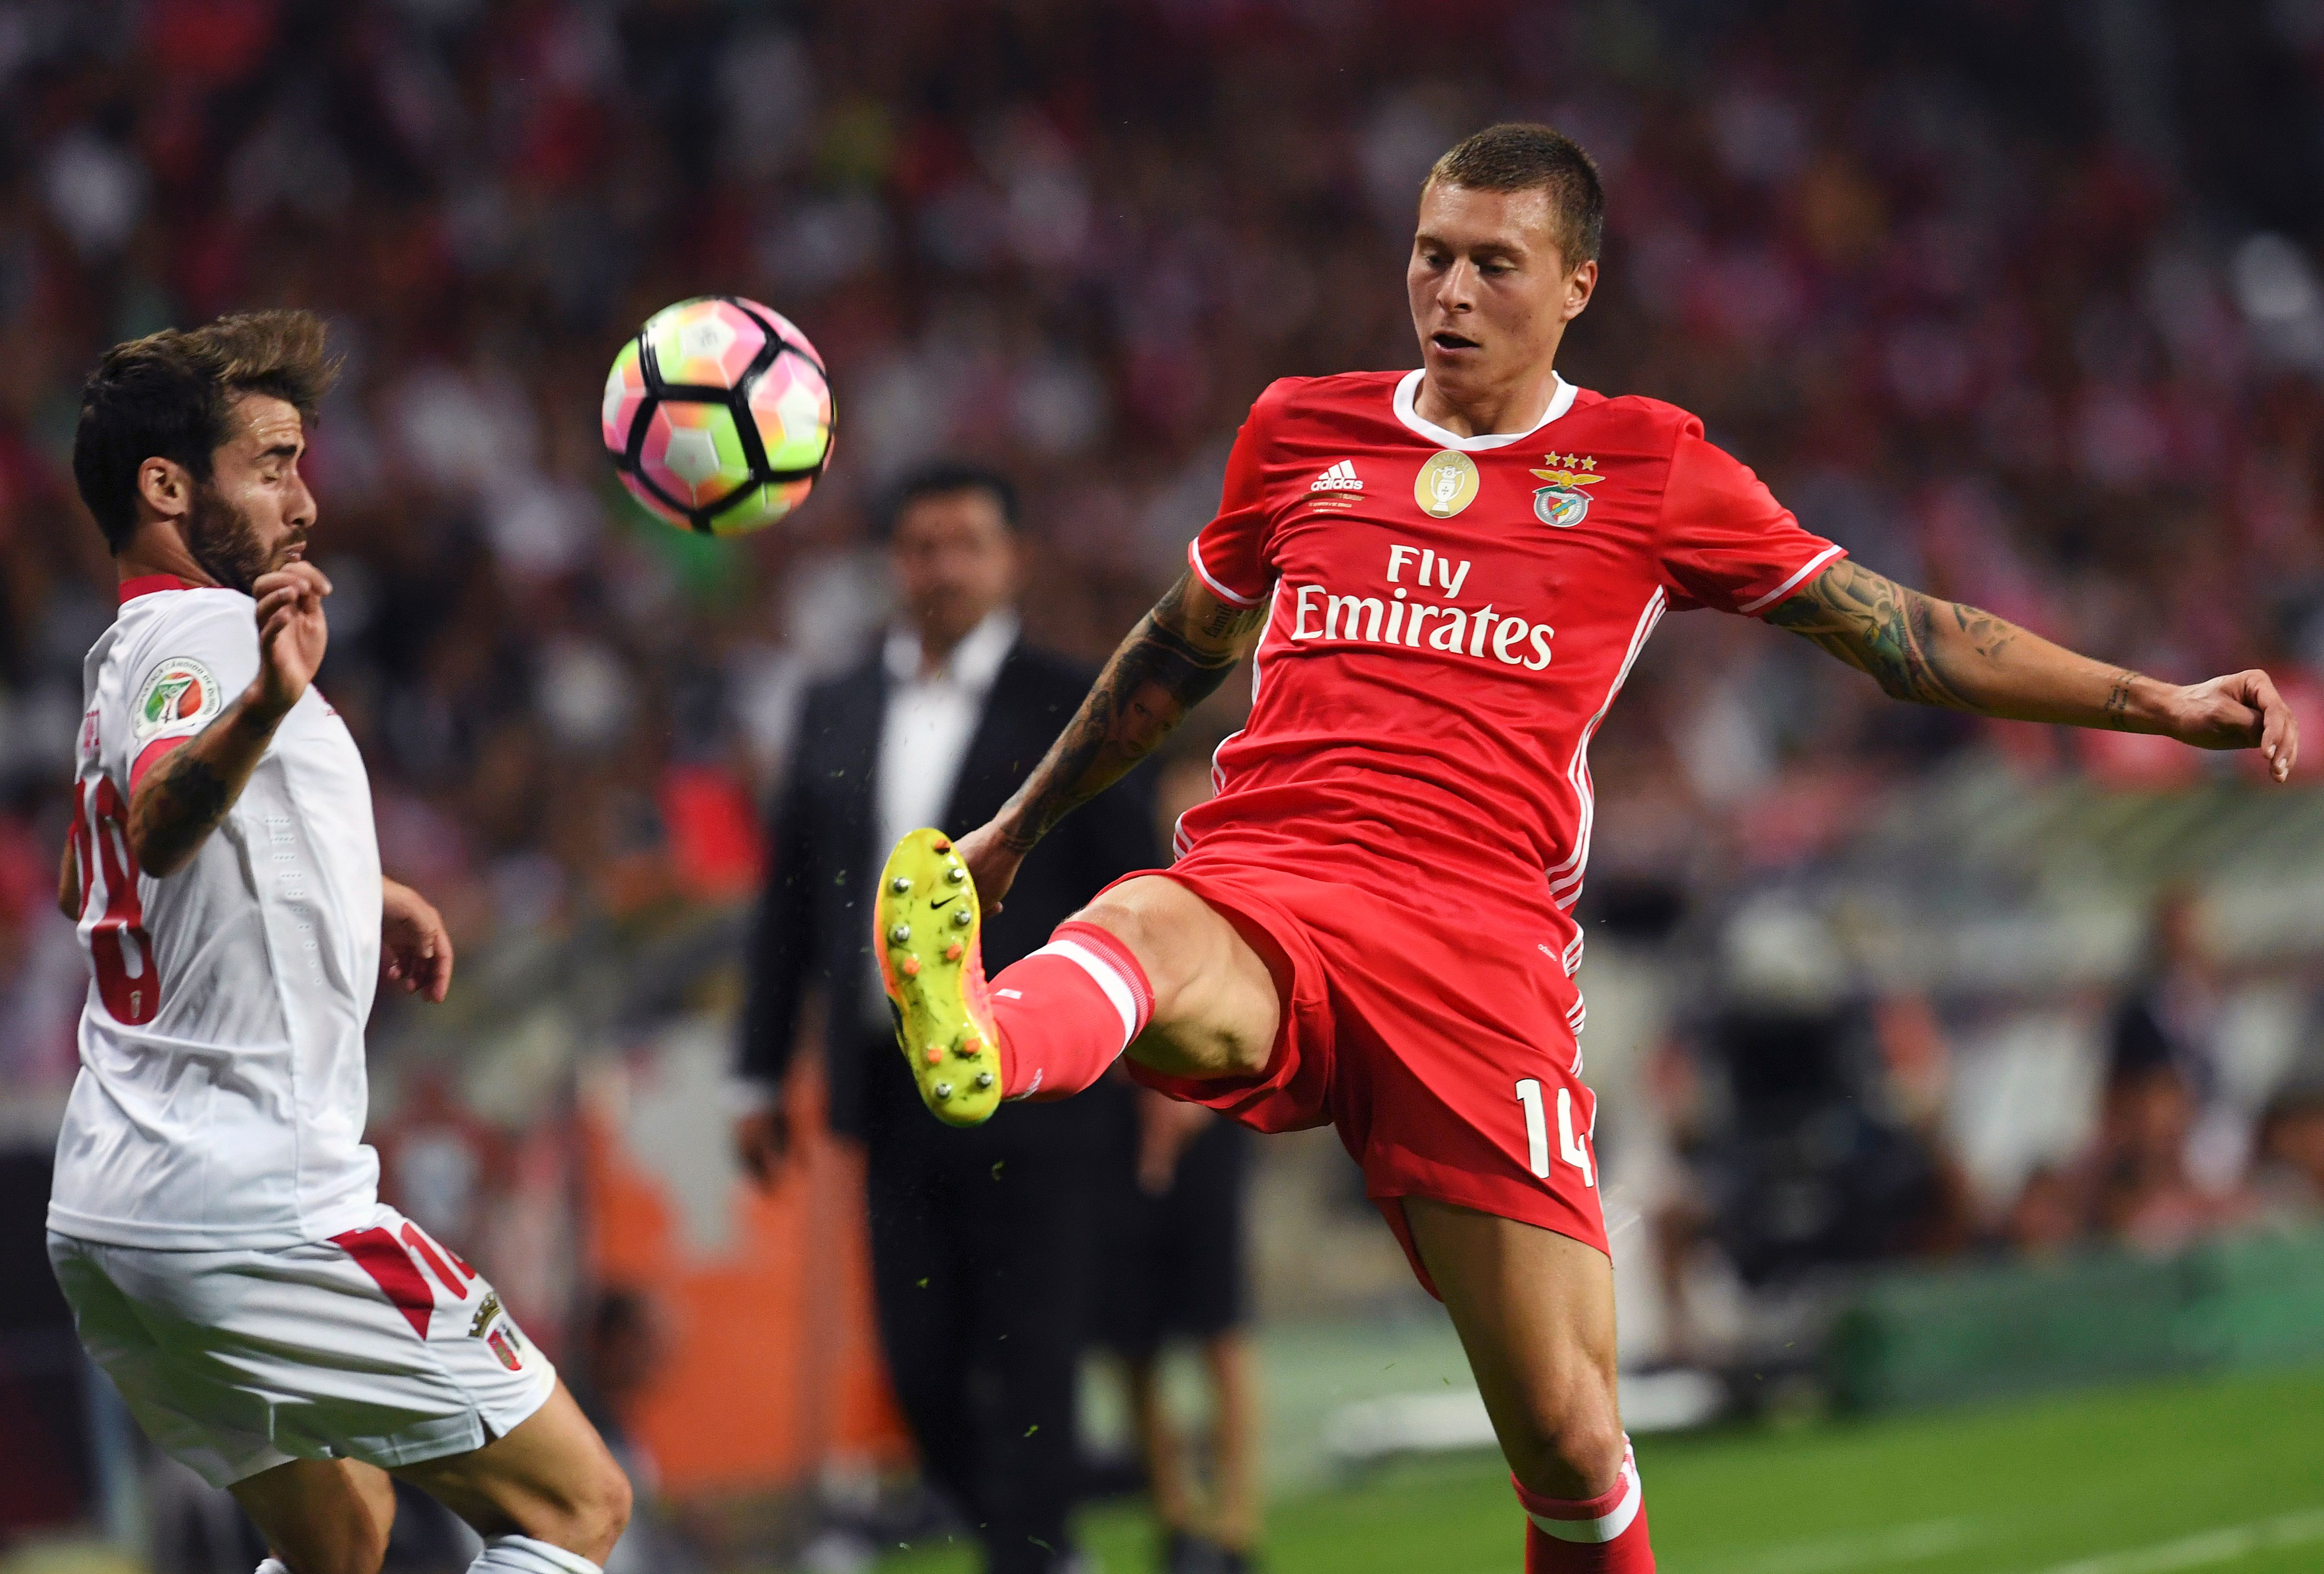 Sporting Braga's forward Rafa (L) vies with Benfica's Swedish defender Victor Nilsson-Lindelof during the Portuguese league football match SL Benfica vs SC Braga at the Municipal stadium in Aveiro on August 7, 2016. / AFP / FRANCISCO LEONG        (Photo credit should read FRANCISCO LEONG/AFP/Getty Images)